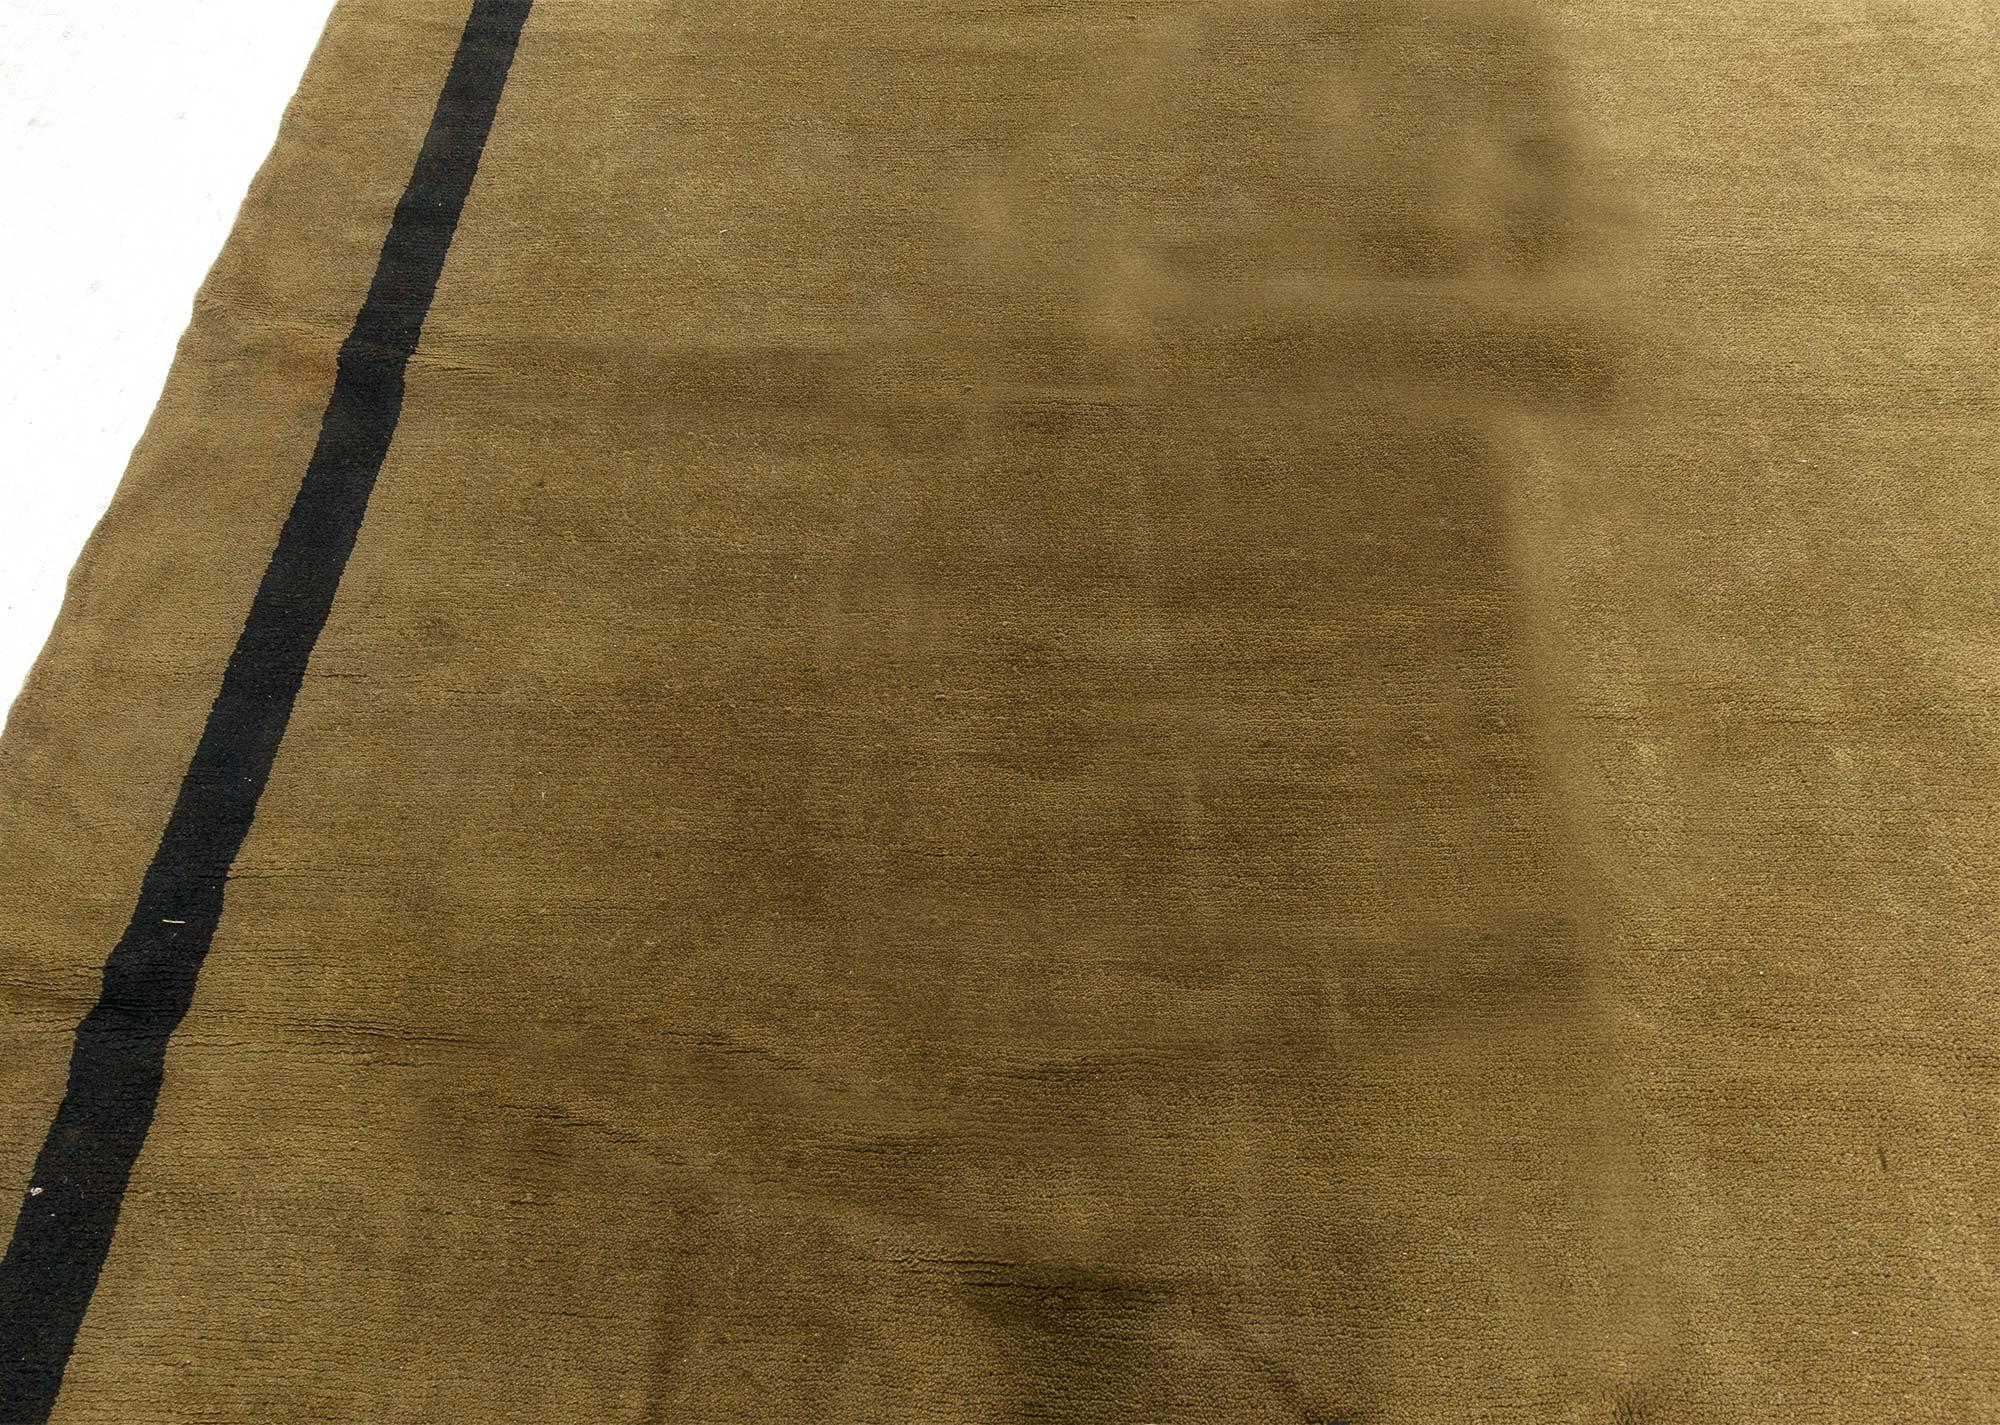 Oversized Vintage French Art Deco Rug In Good Condition For Sale In New York, NY